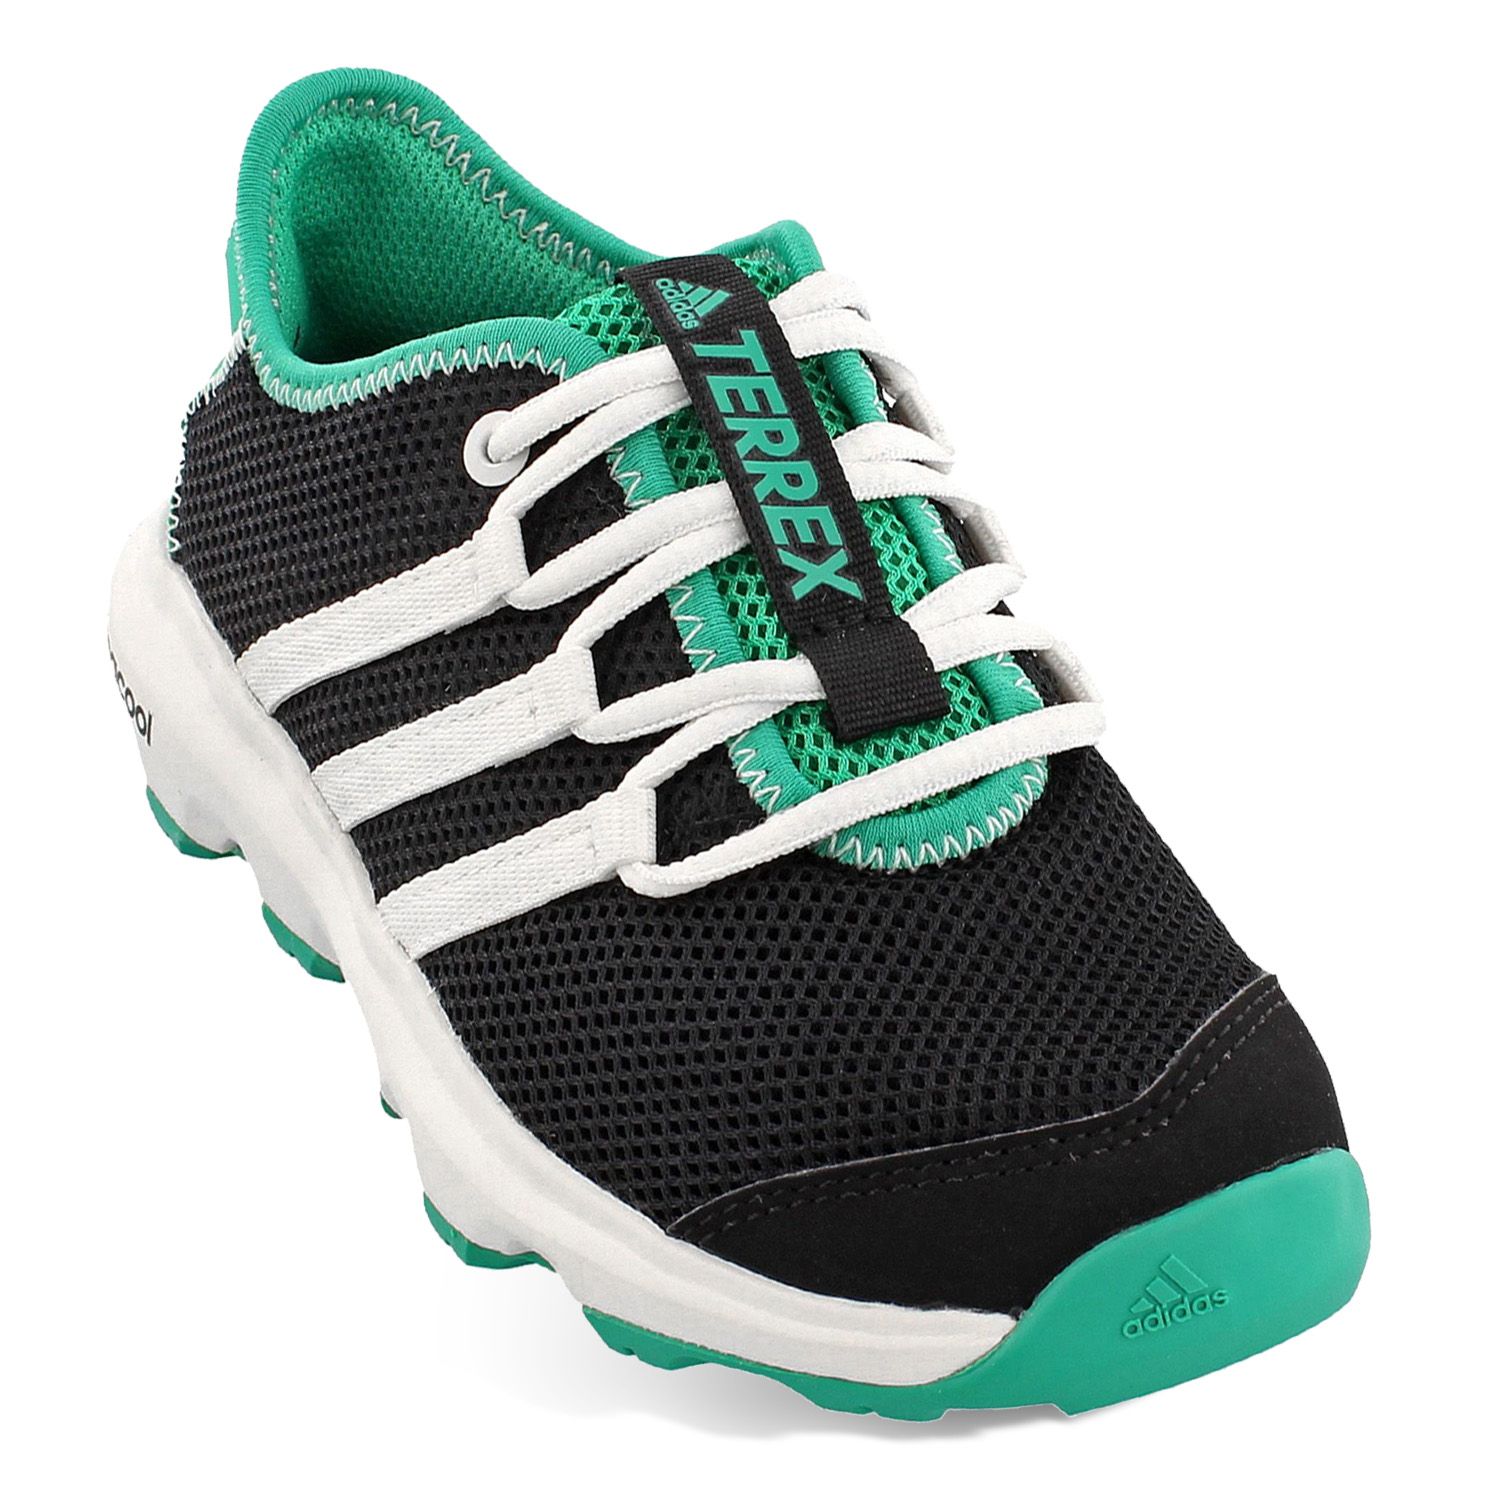 adidas Outdoor Terrex Climacool Voyager Boys' Trail Shoes